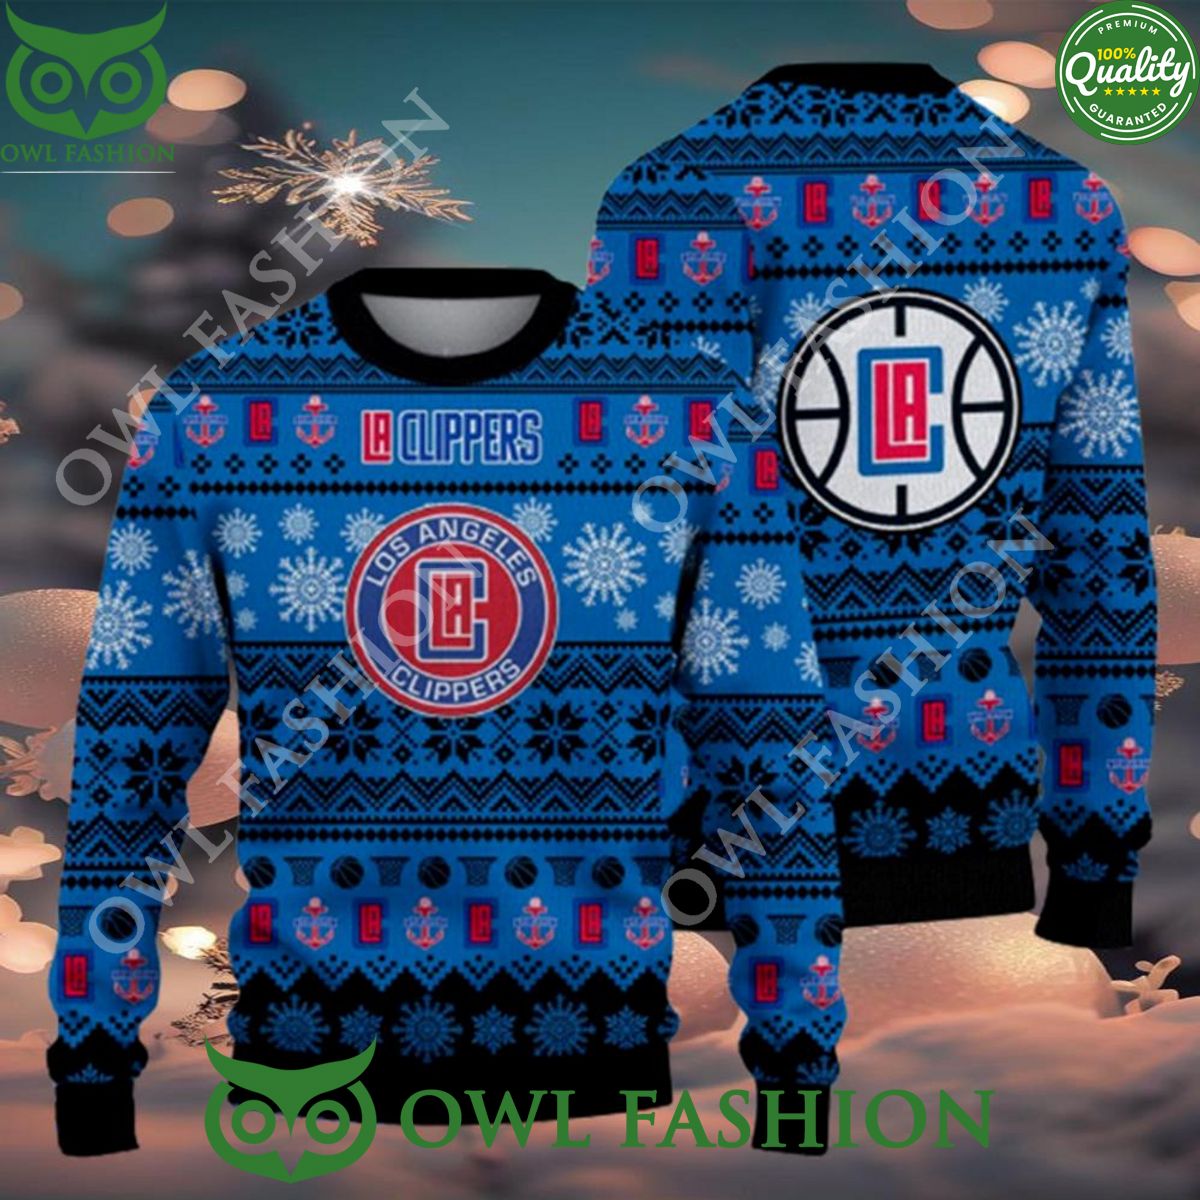 LA Clippers National Basketball Association Ugly Christmas Sweater Jumper